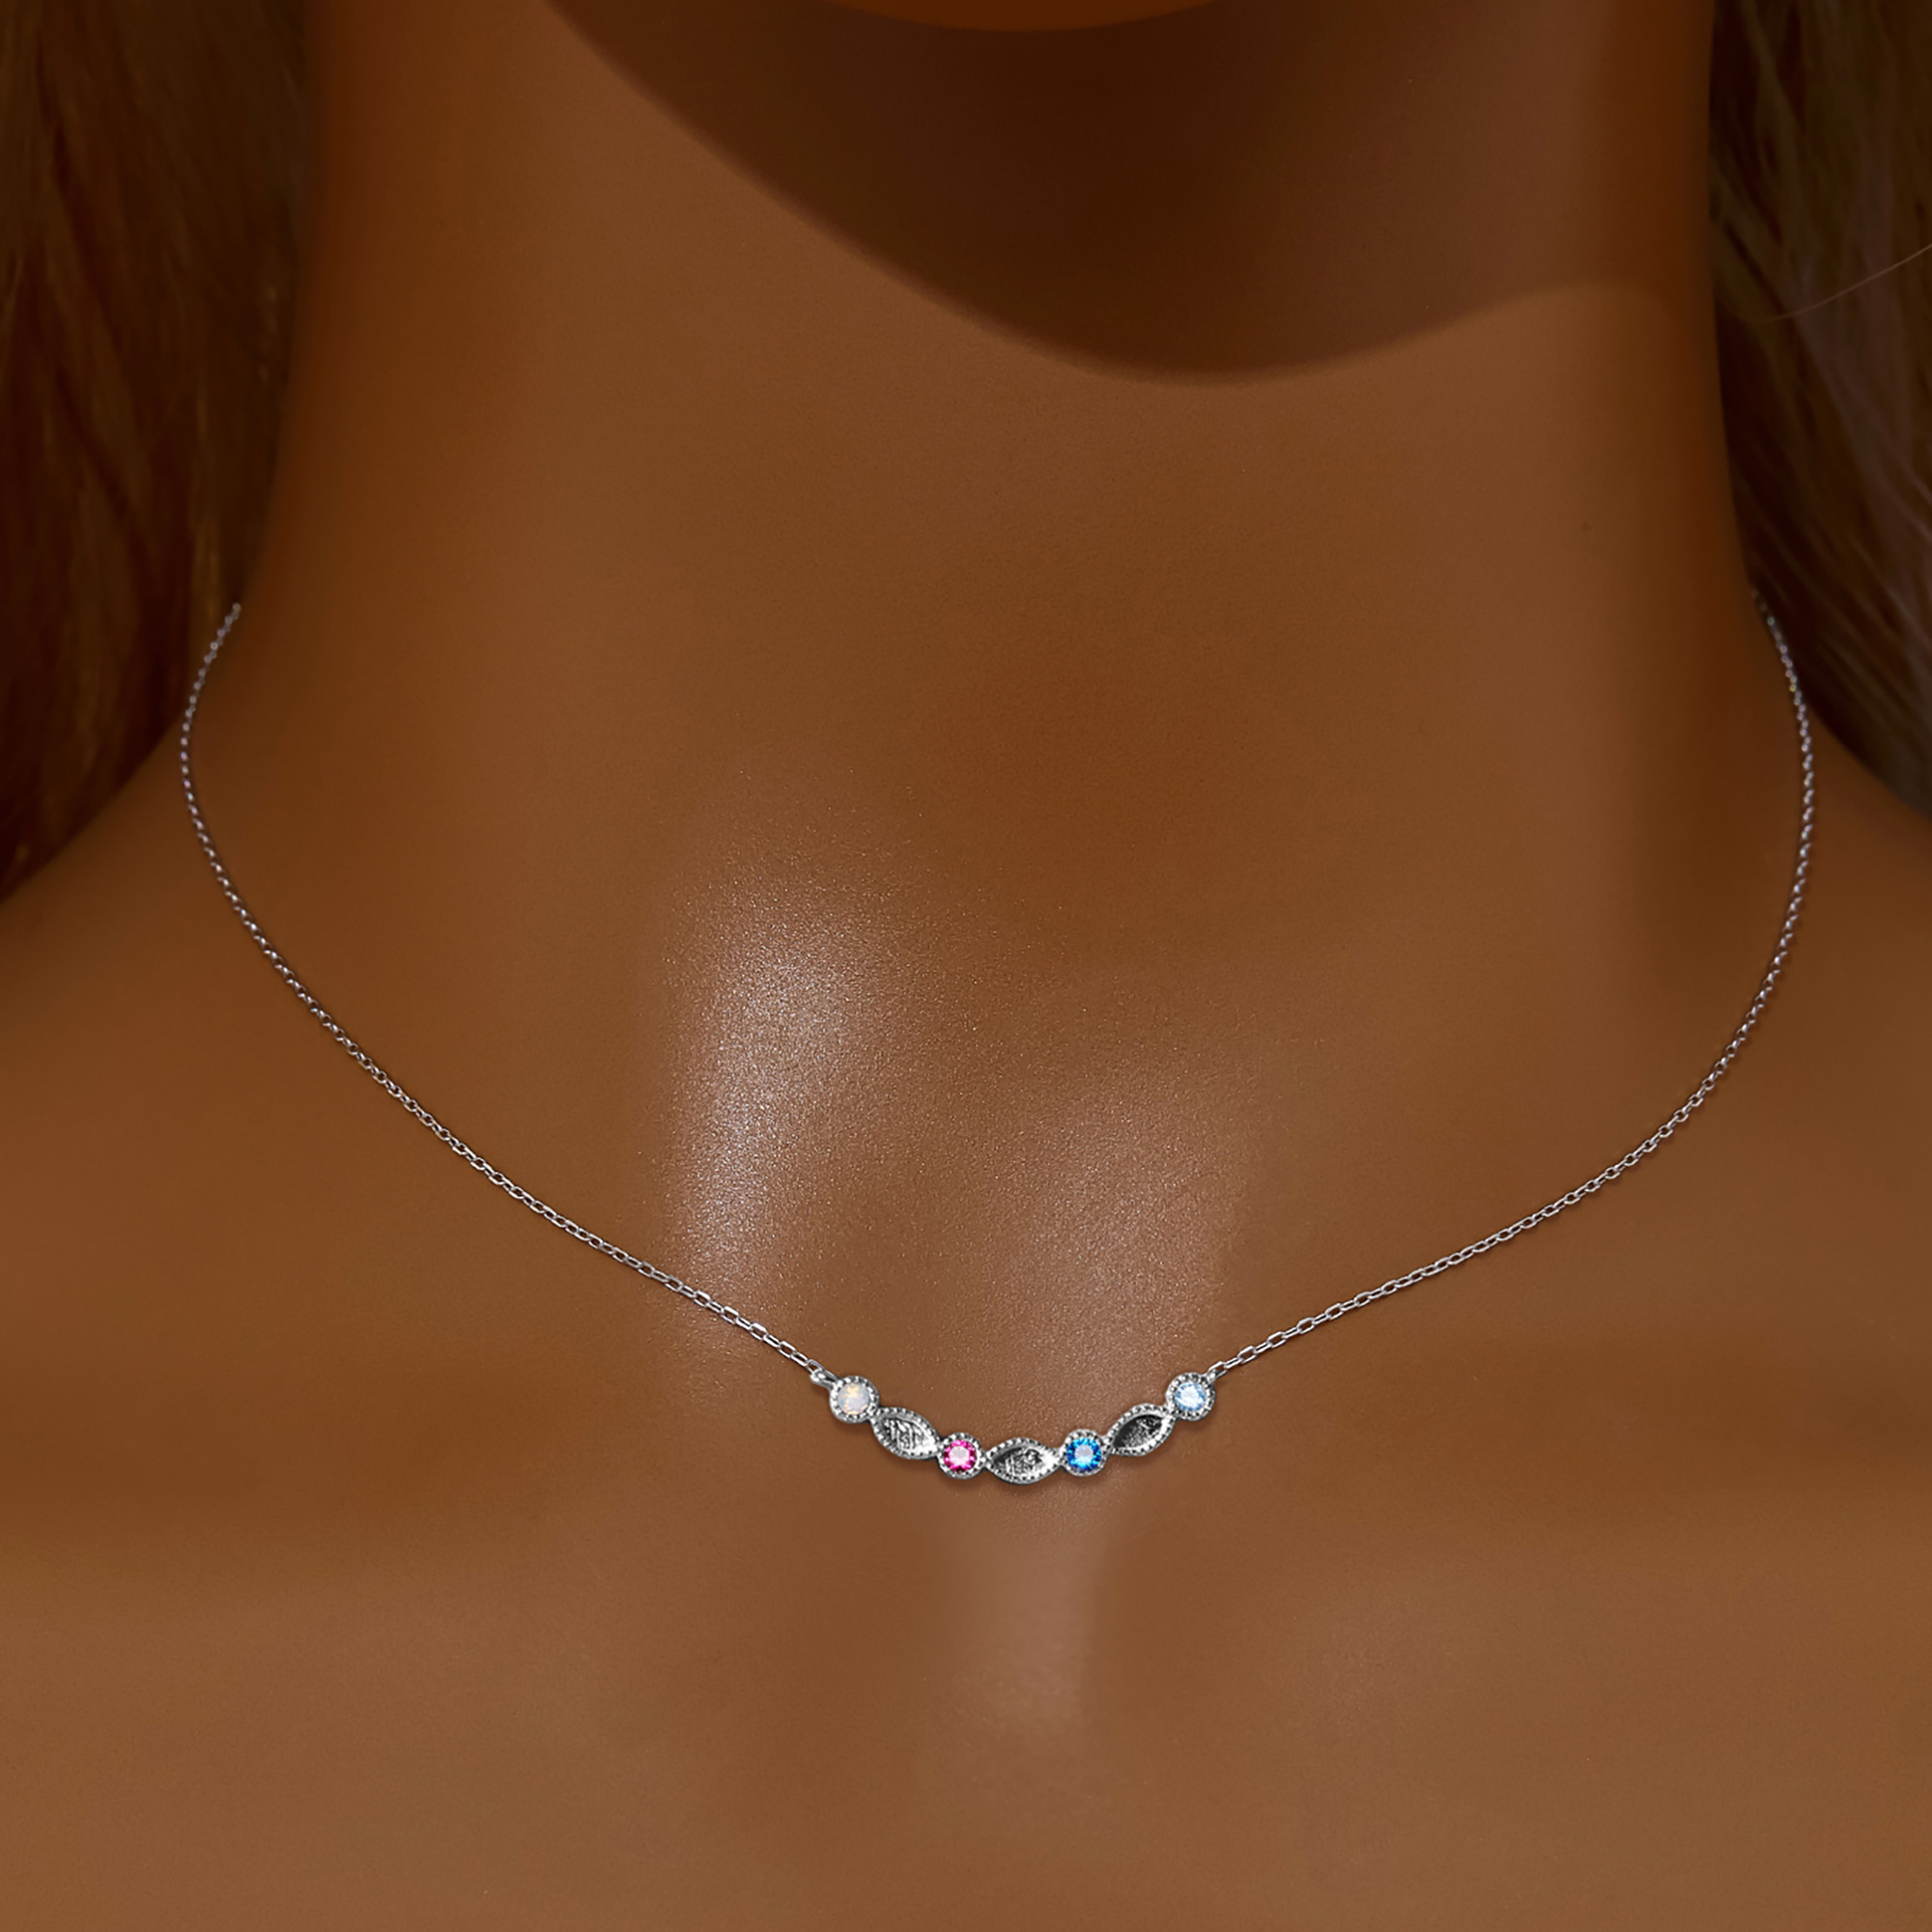 Keepsake Breast Milk Resin Pendant Necklace Settings,Solid 925 Sterling Silver 2x4MM Marquise Bezel CZ Birthstone Necklace With 16''+2'' Chain 1431255 - Click Image to Close